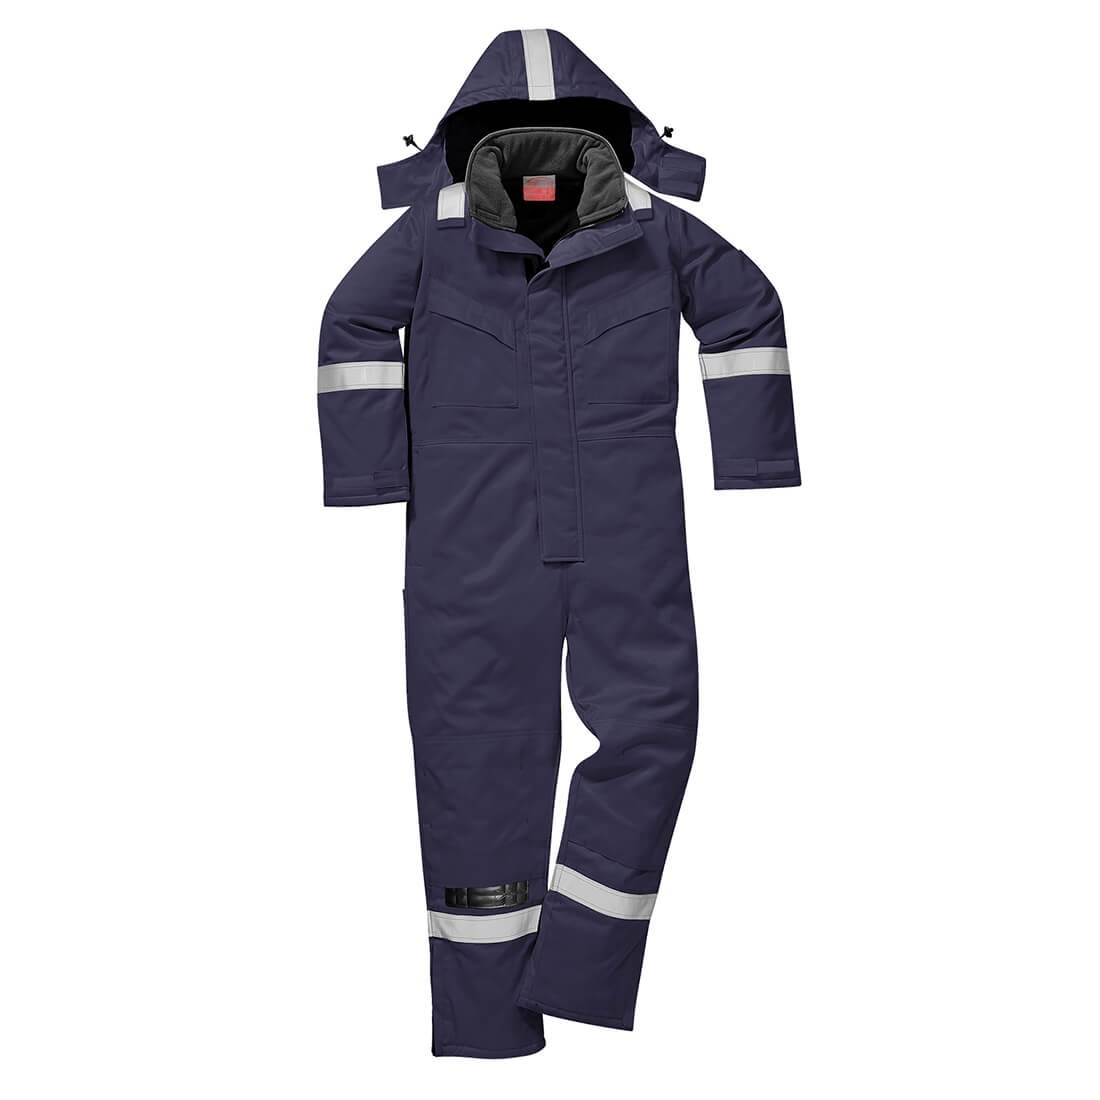 Image of Biz Flame Mens Flame Resistant Antistatic Winter Overall Navy Blue L 32"